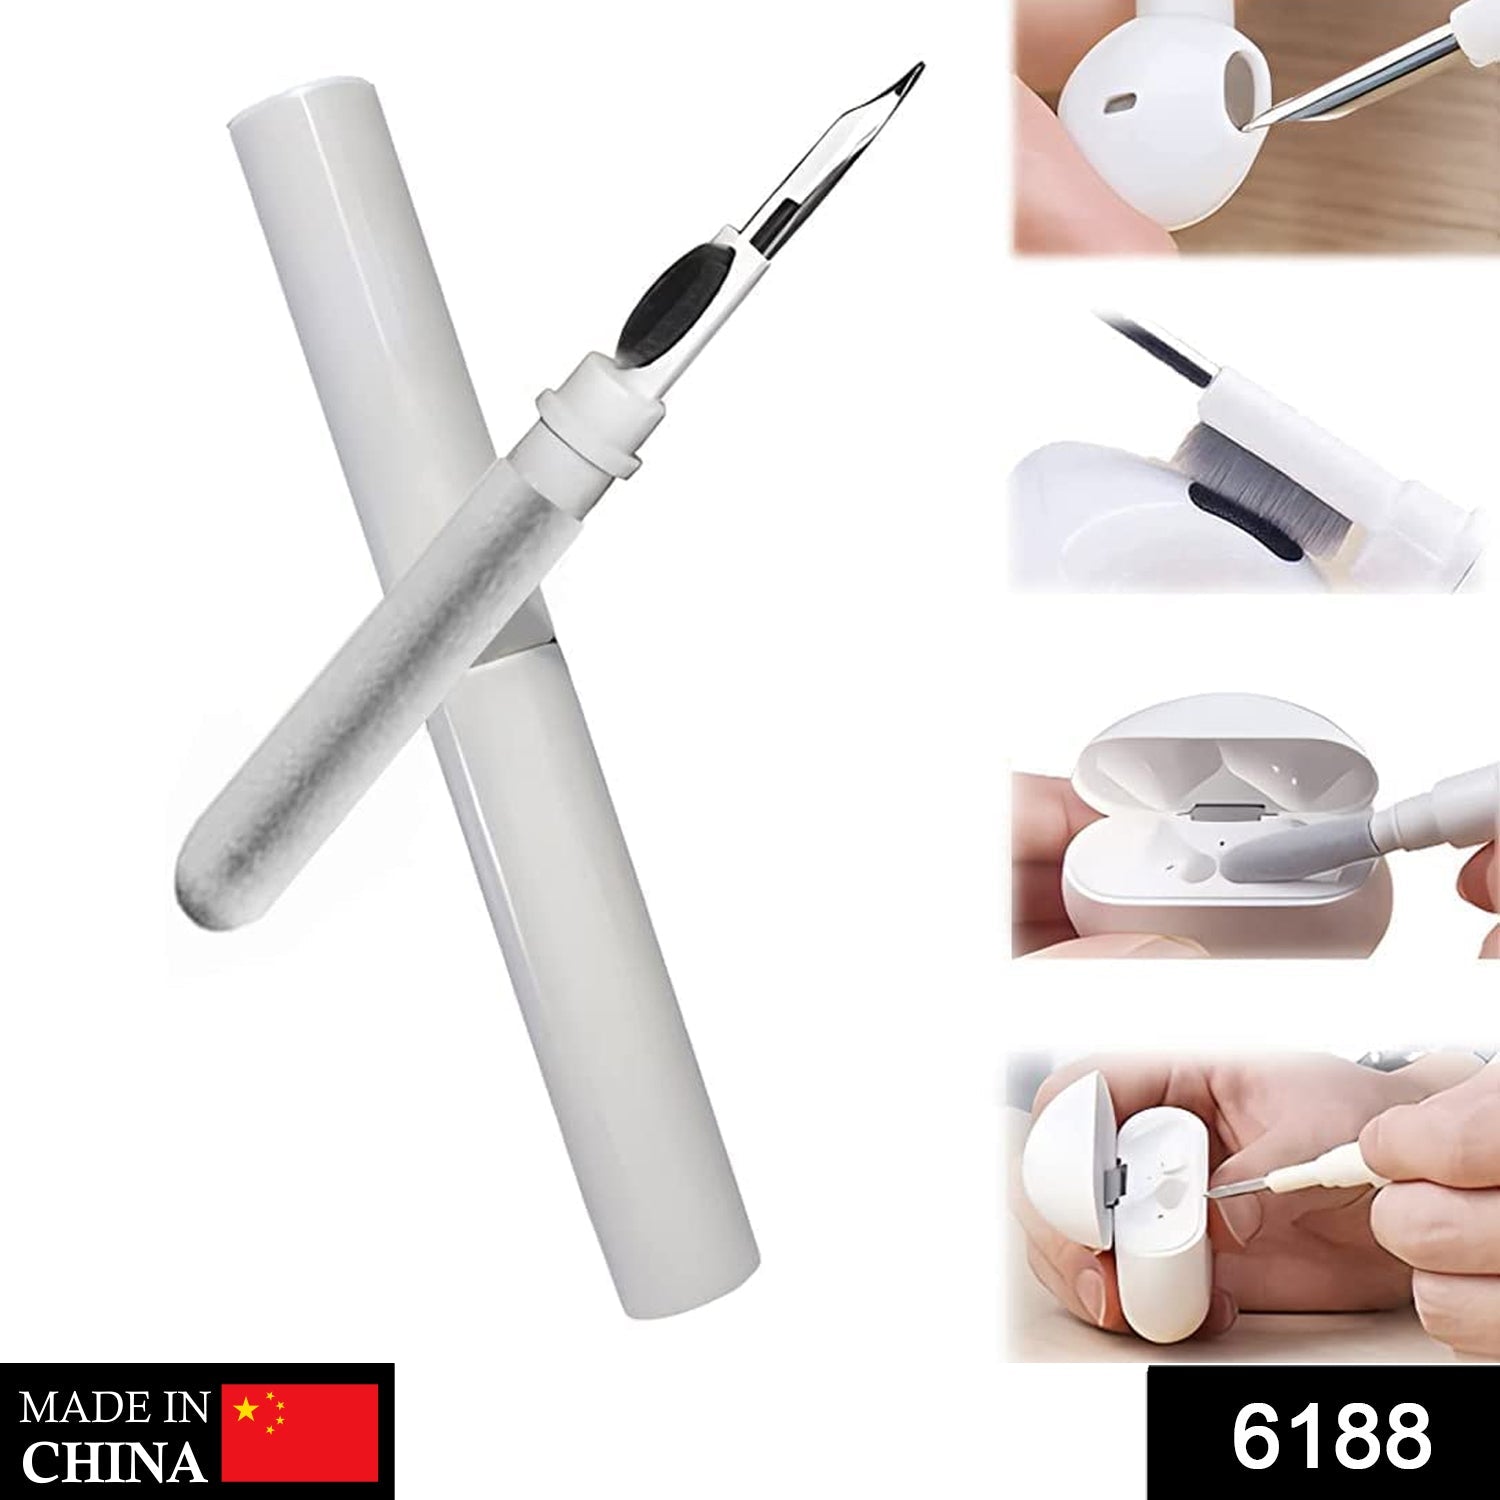 6188 3 In 1 Earbuds Cleaning Pen For Cleaning Of Ear Buds And Ear Phones Easily Without Having Any Damage. DeoDap